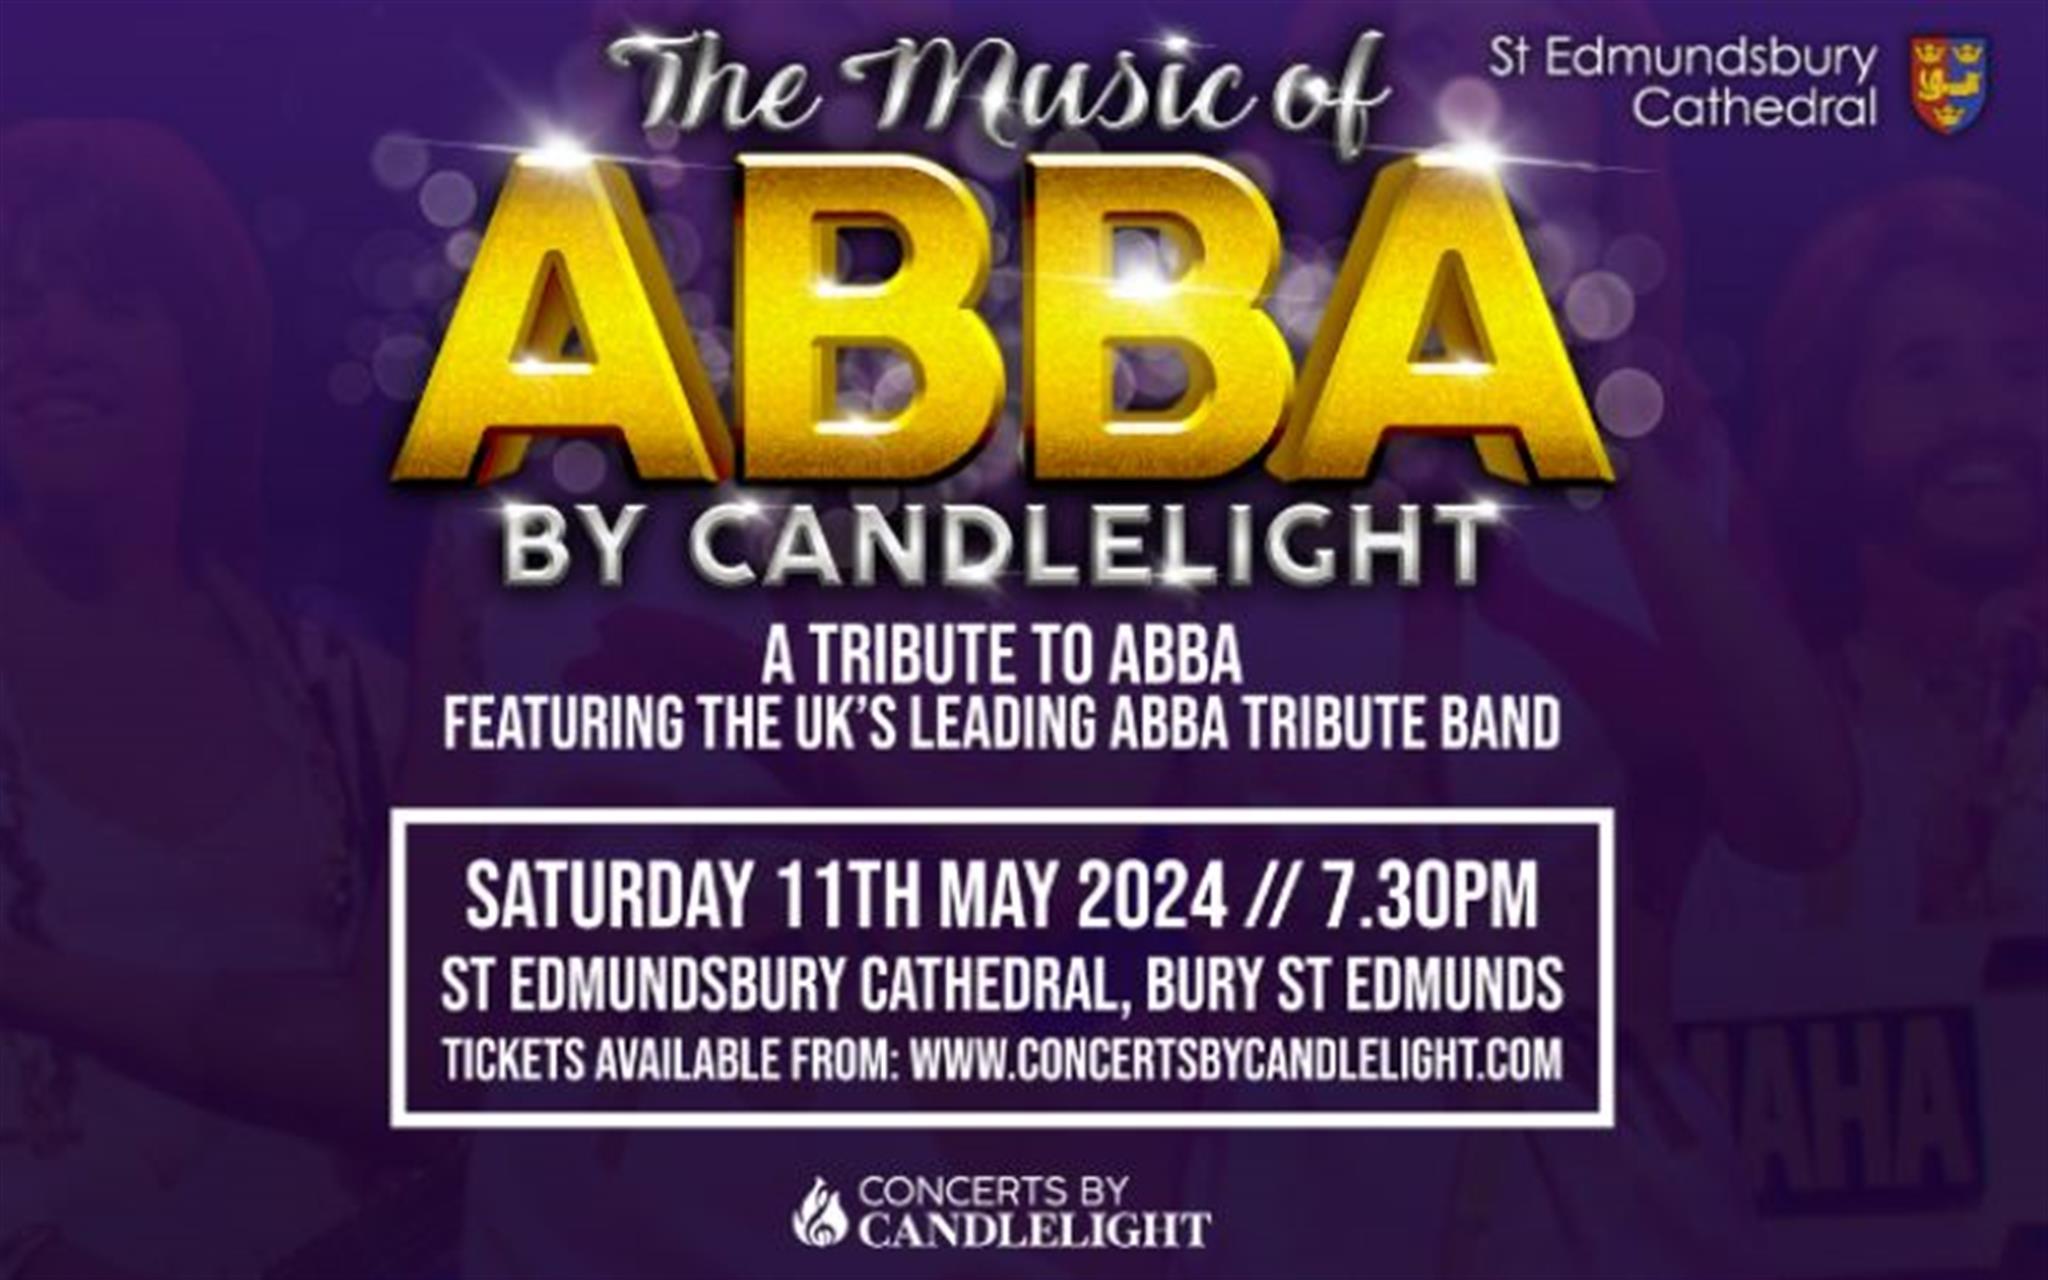 The Music of ABBA by Candelight at St Edmundsbury Cathedral!